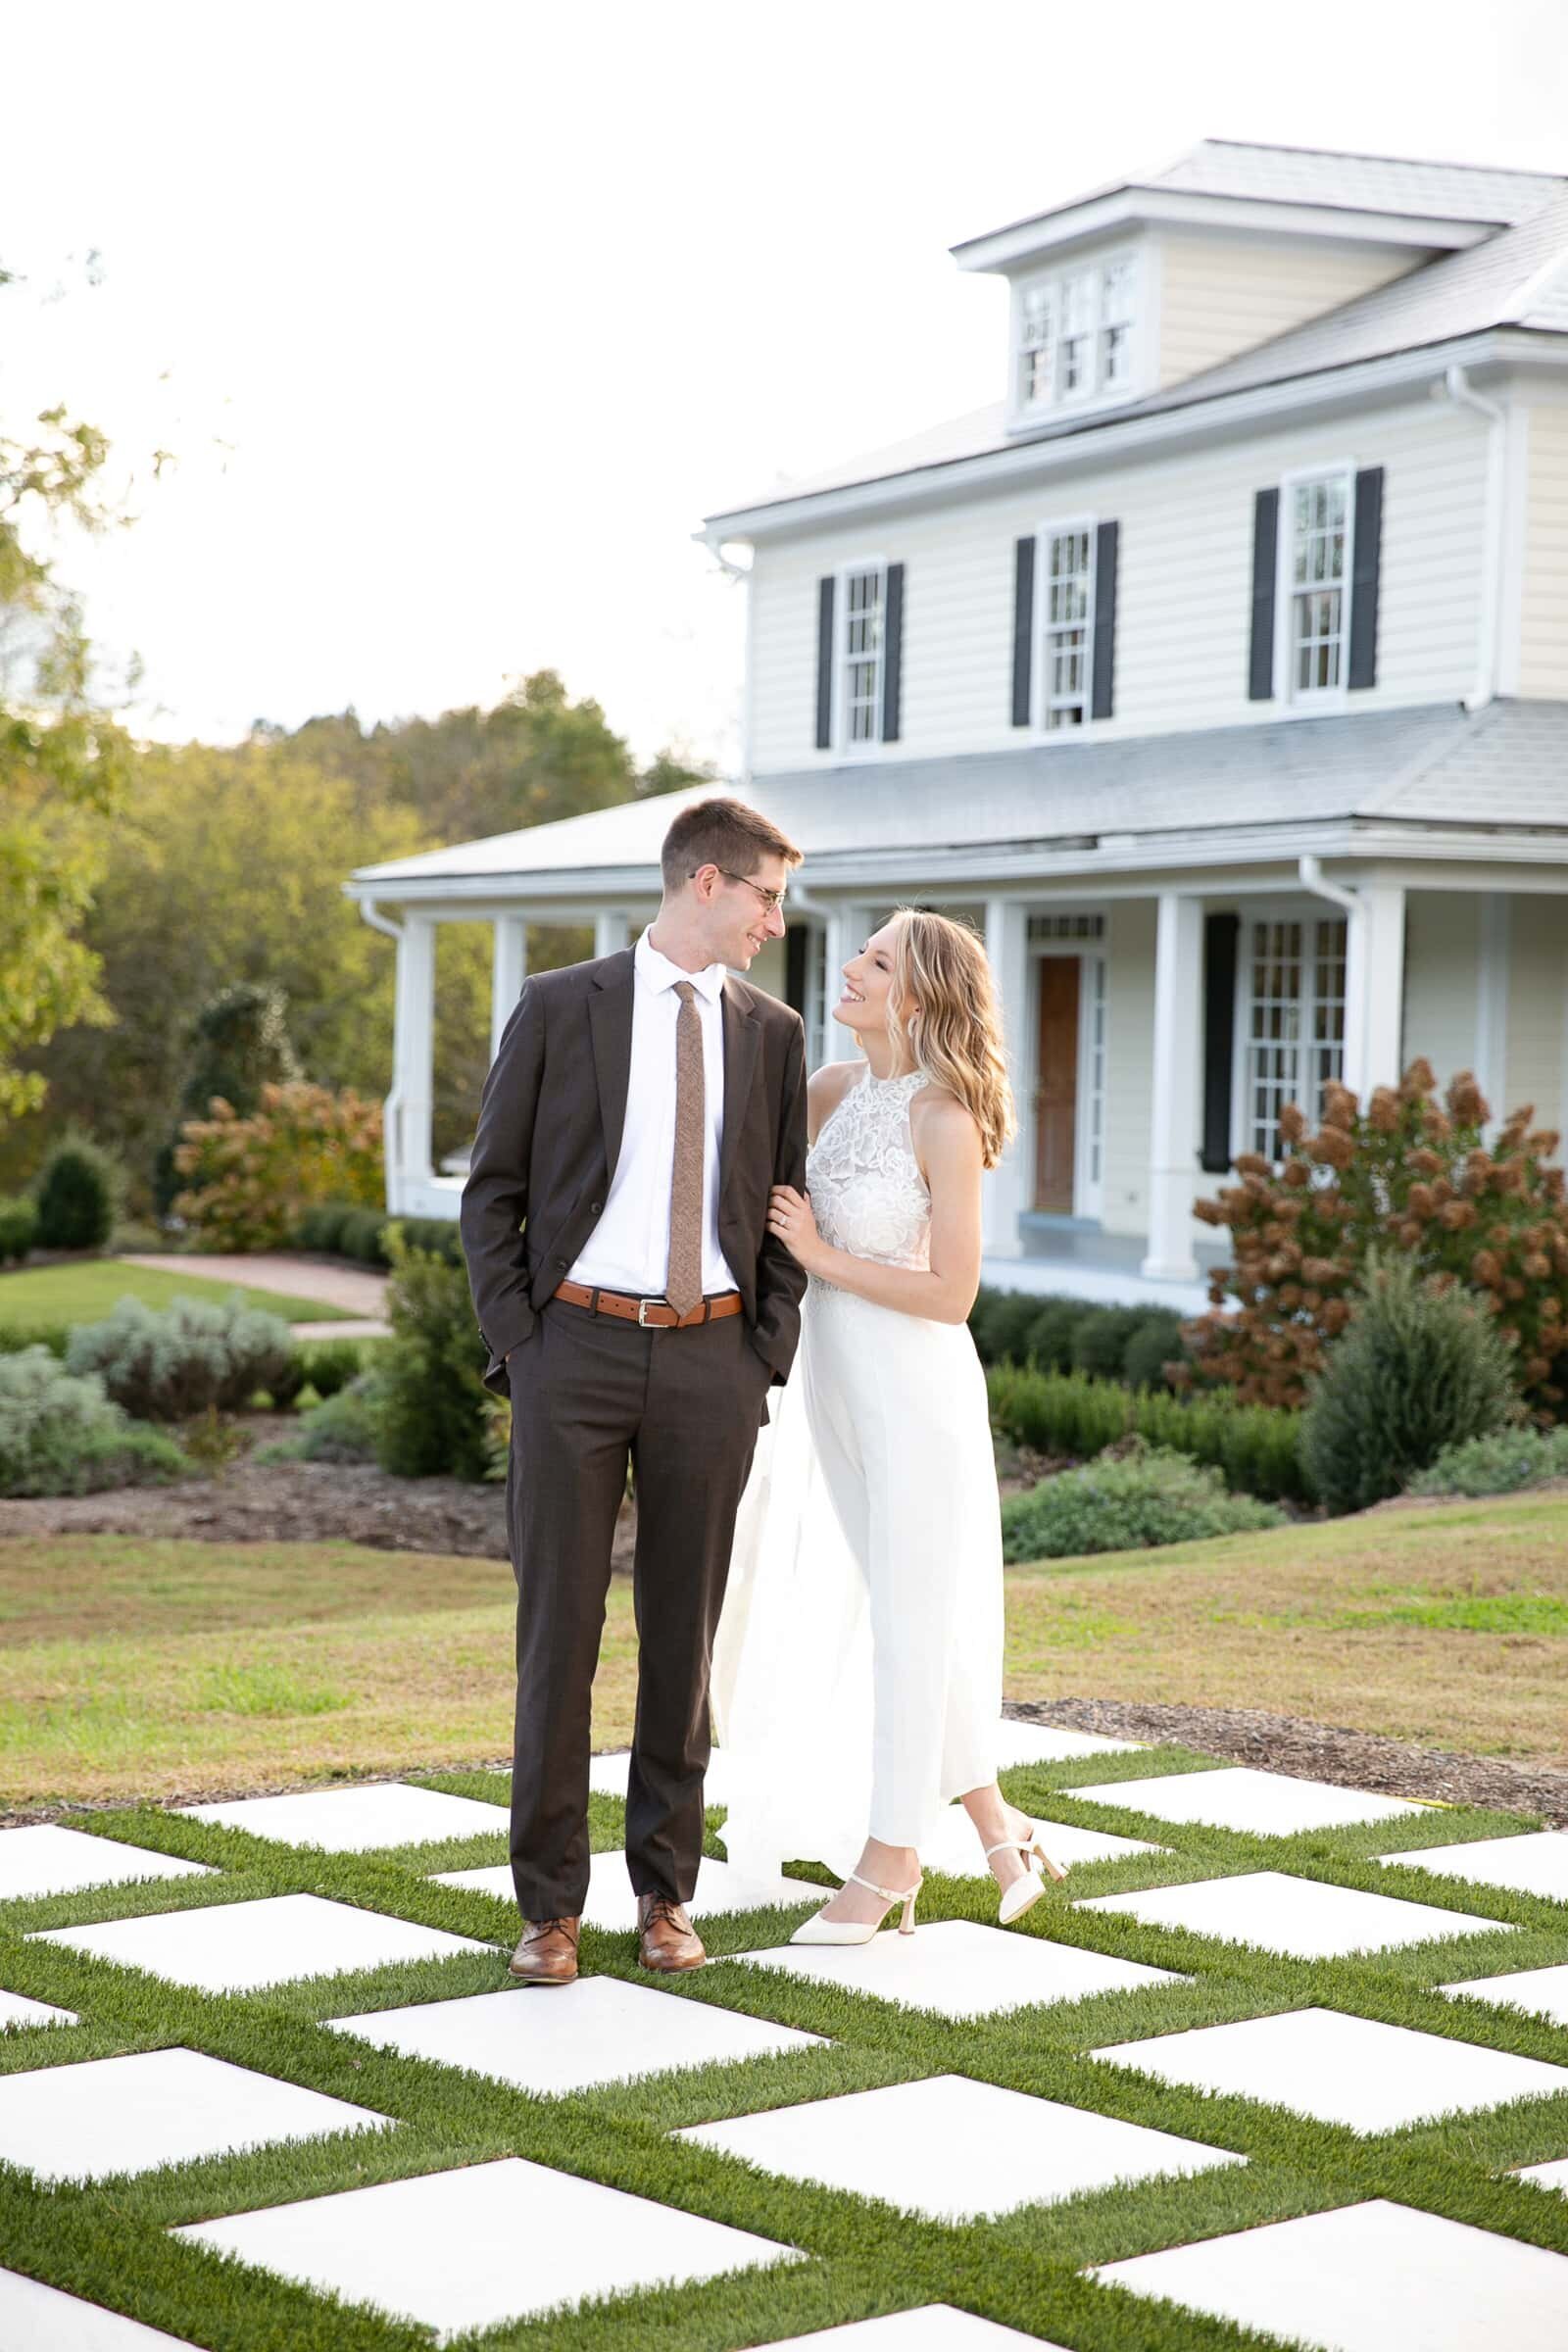 Wedding couple looking into each other's eyes standing in front of the main house at Walnut Hill Raleigh. The woman is wearing a white pantsuit and the man is wearing brown suit.